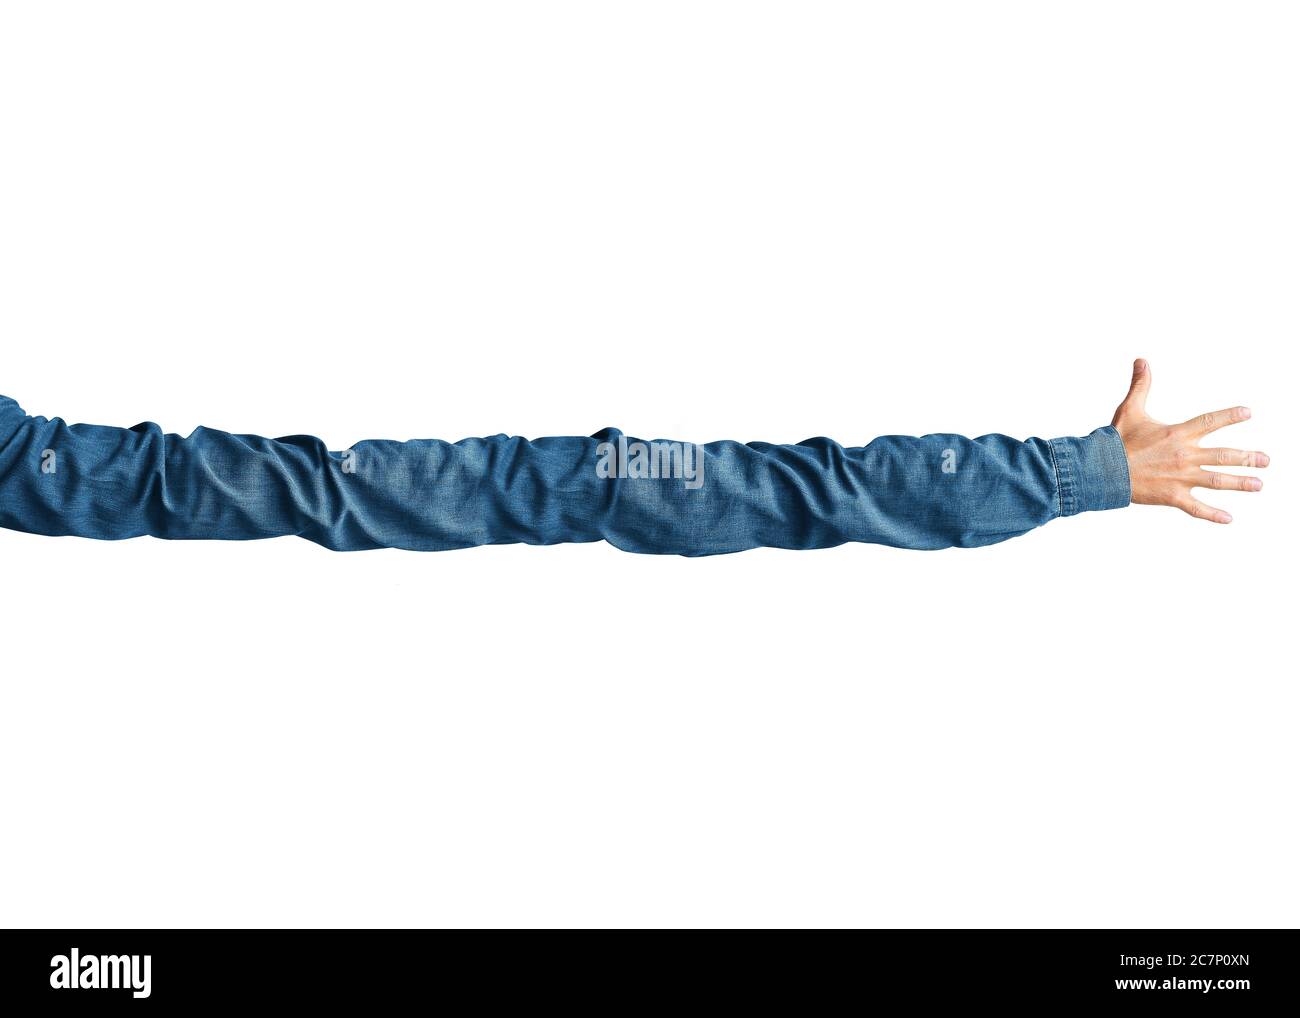 Very long arm reaching for something desirable Stock Photo - Alamy